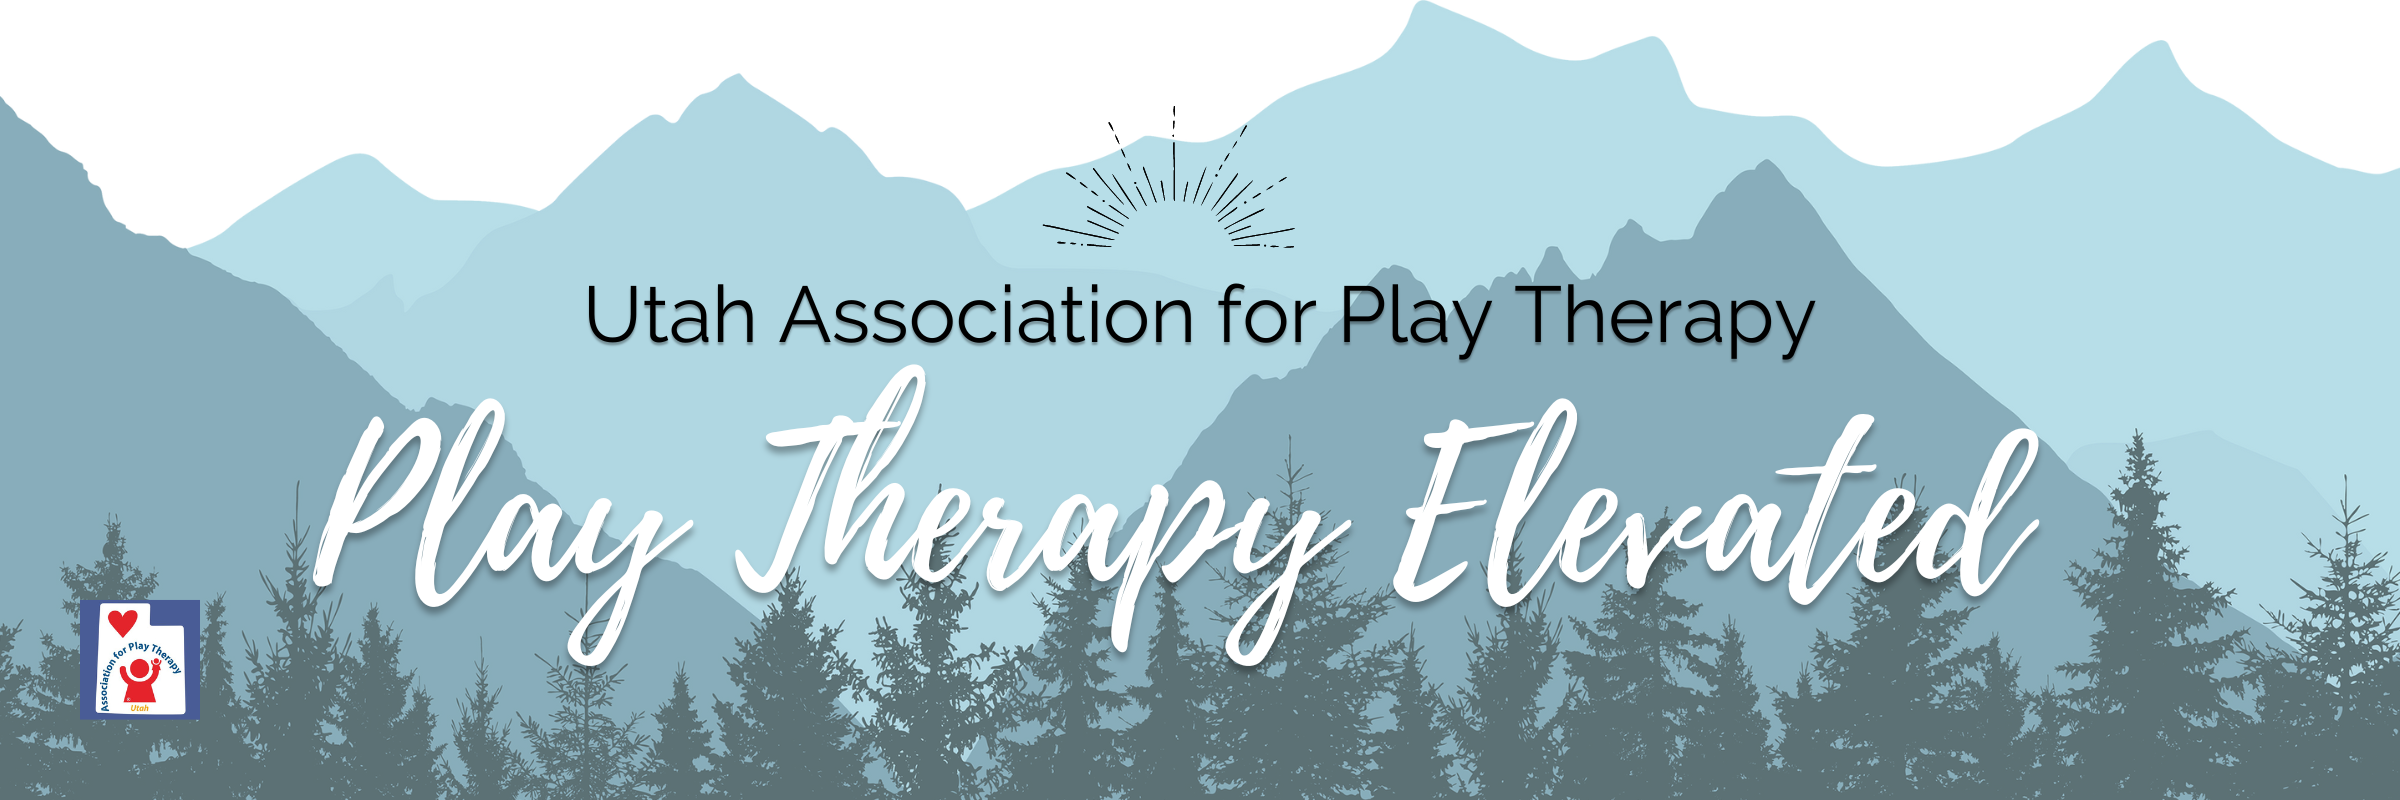 Utah Play Therapy Elevated